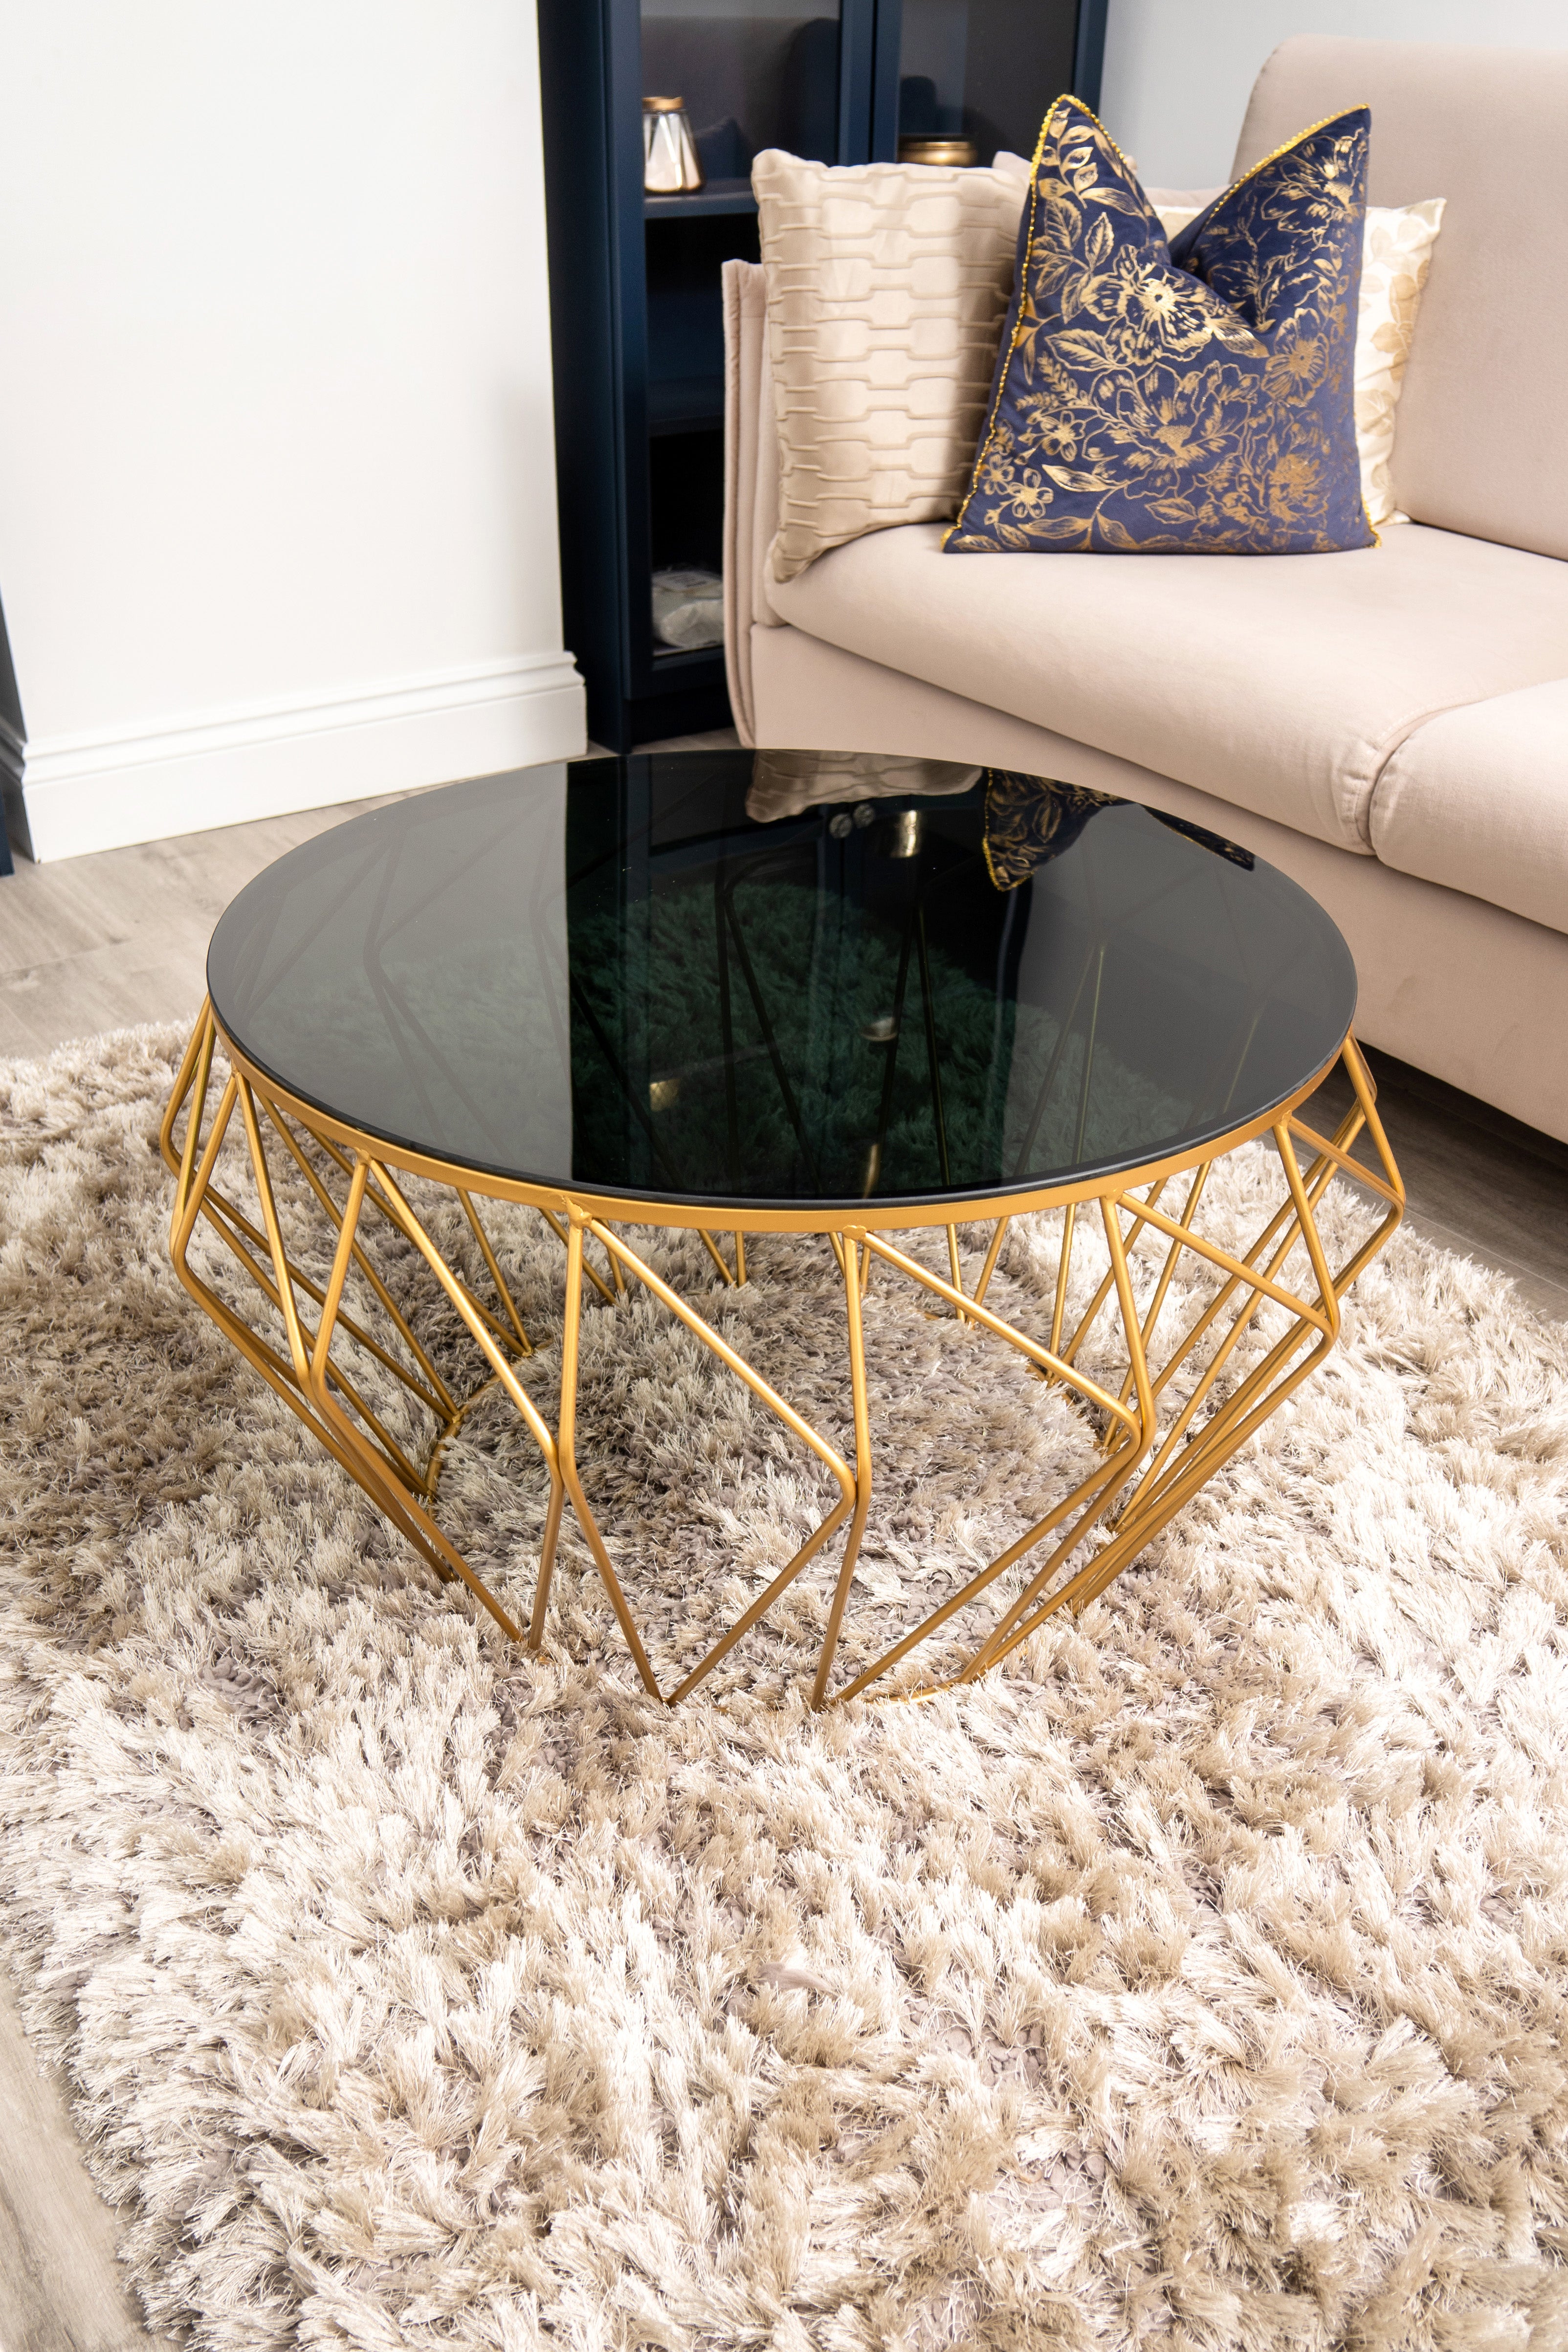 Vienna Black & Gold Metal Round Luxury Coffee Table- Venus Collection Ready Assembled